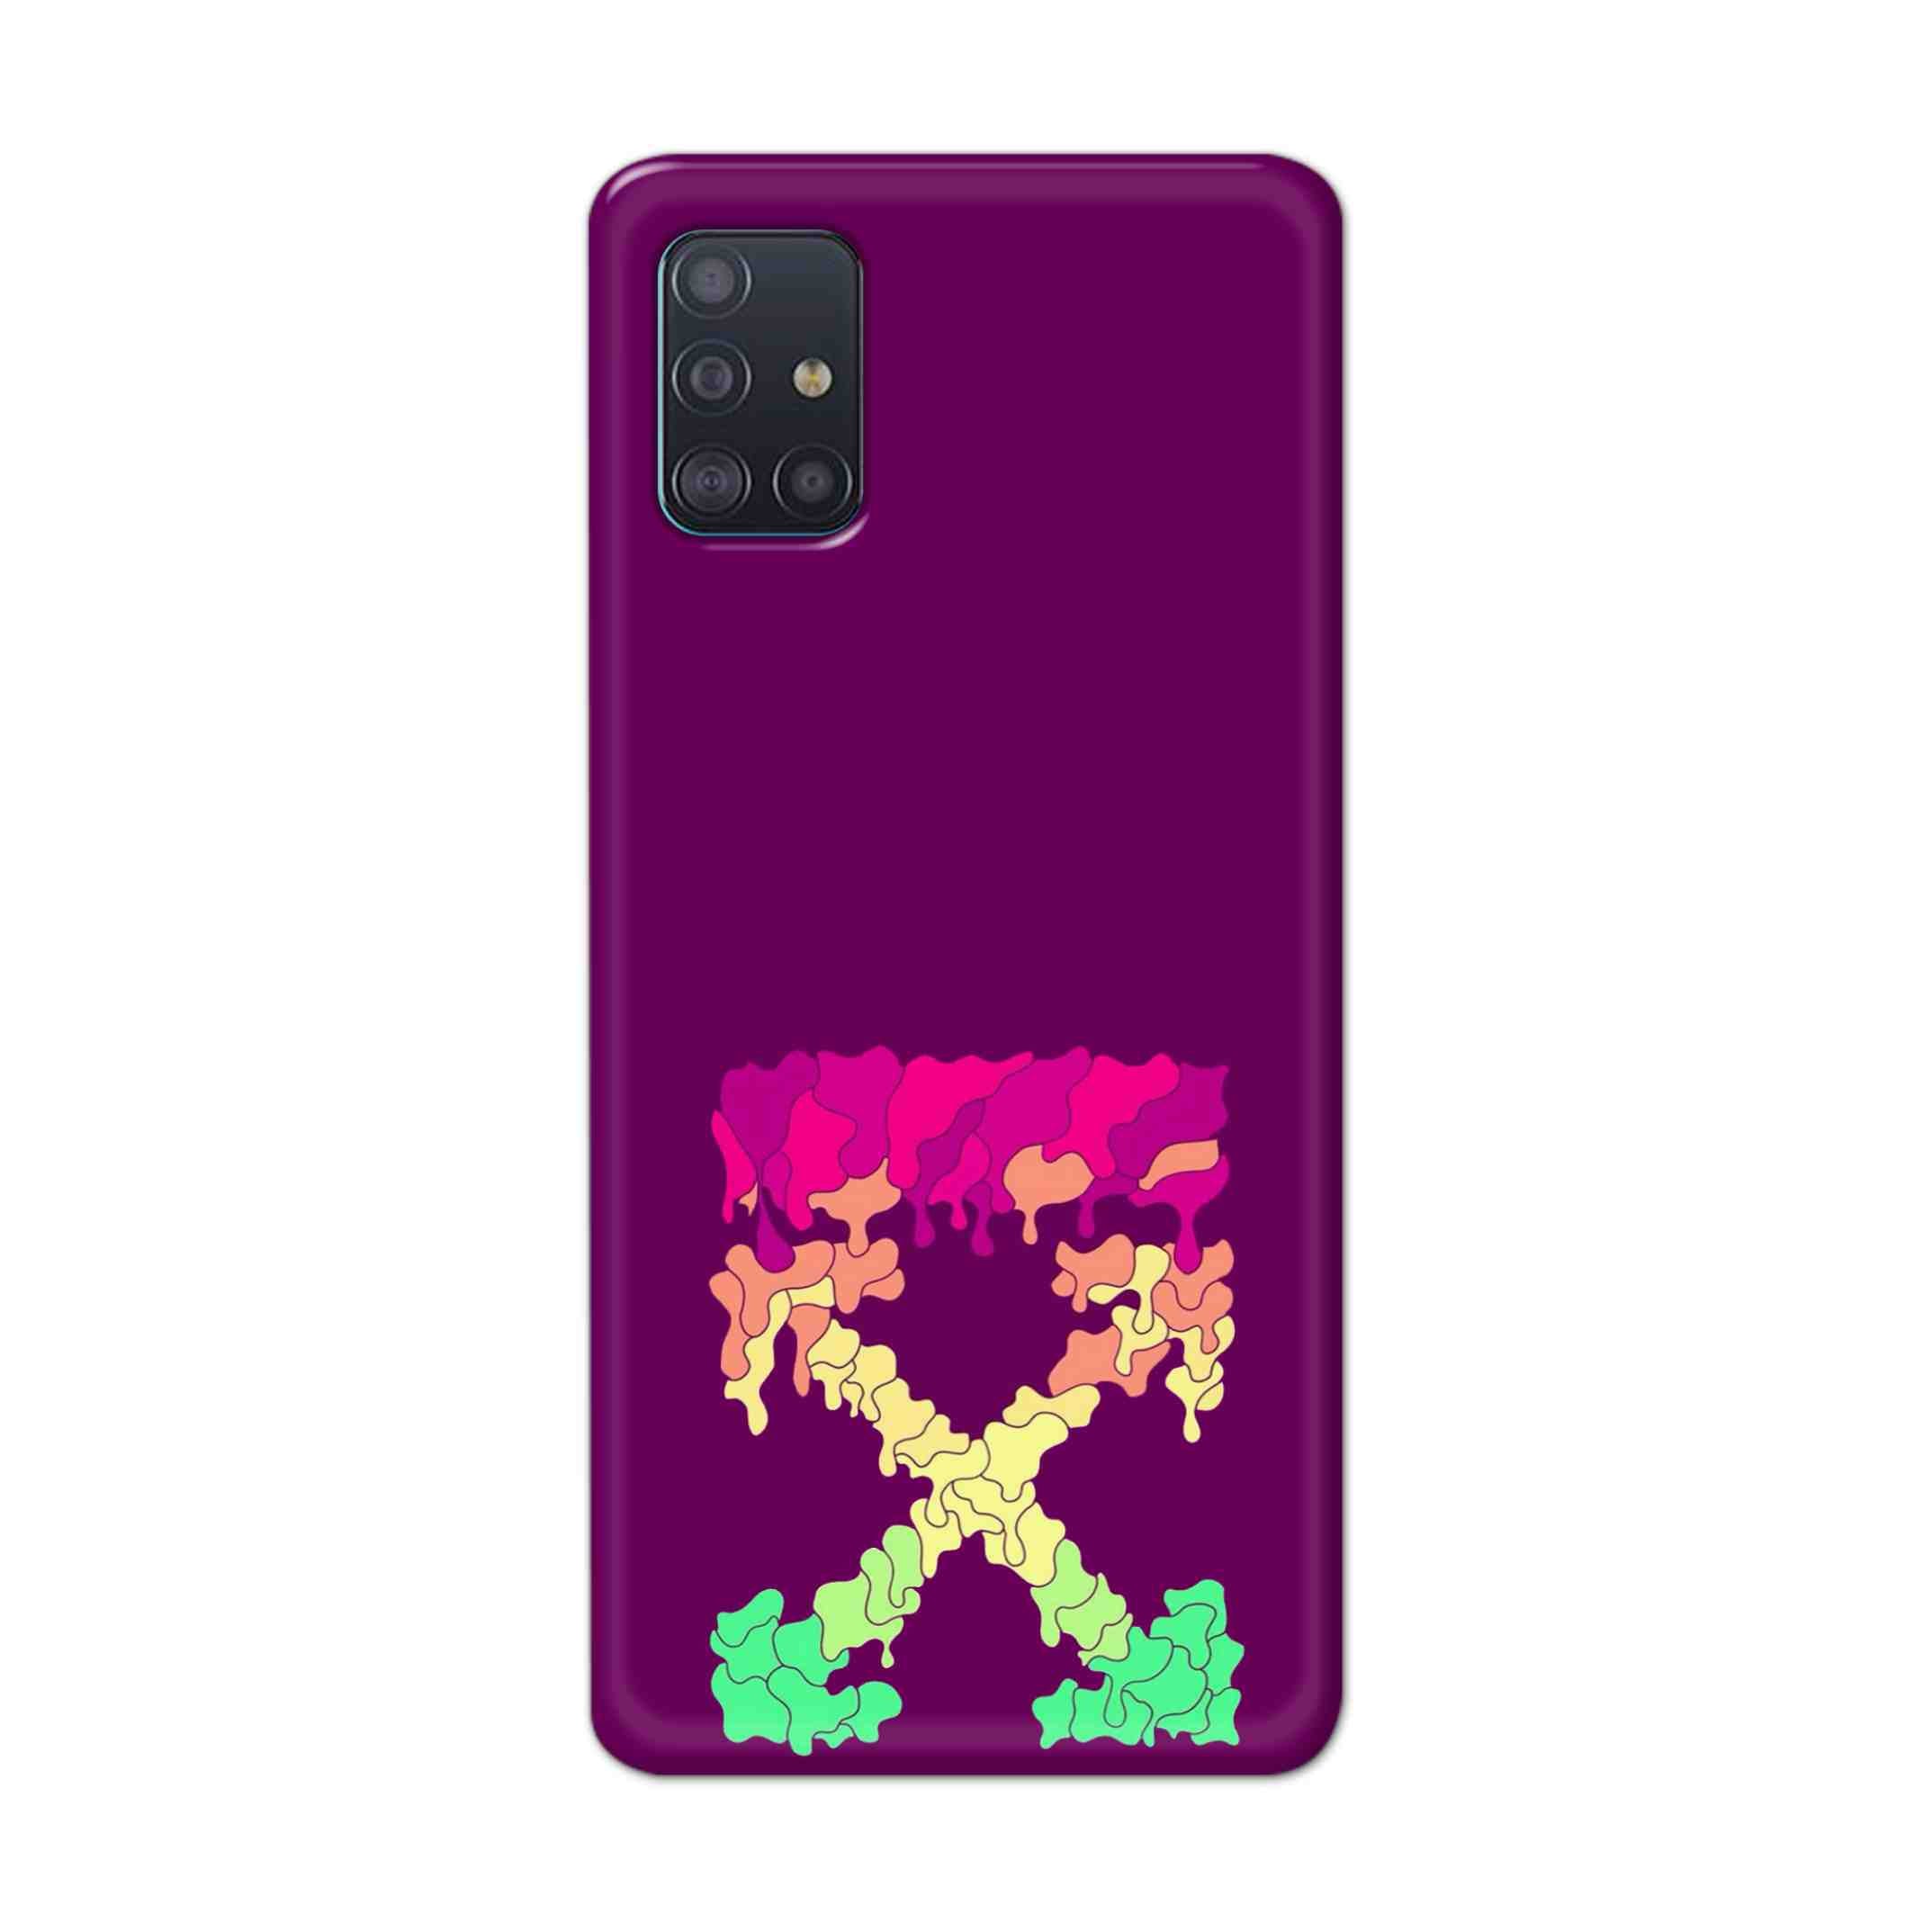 Buy X.O Hard Back Mobile Phone Case Cover For Samsung Galaxy A71 Online